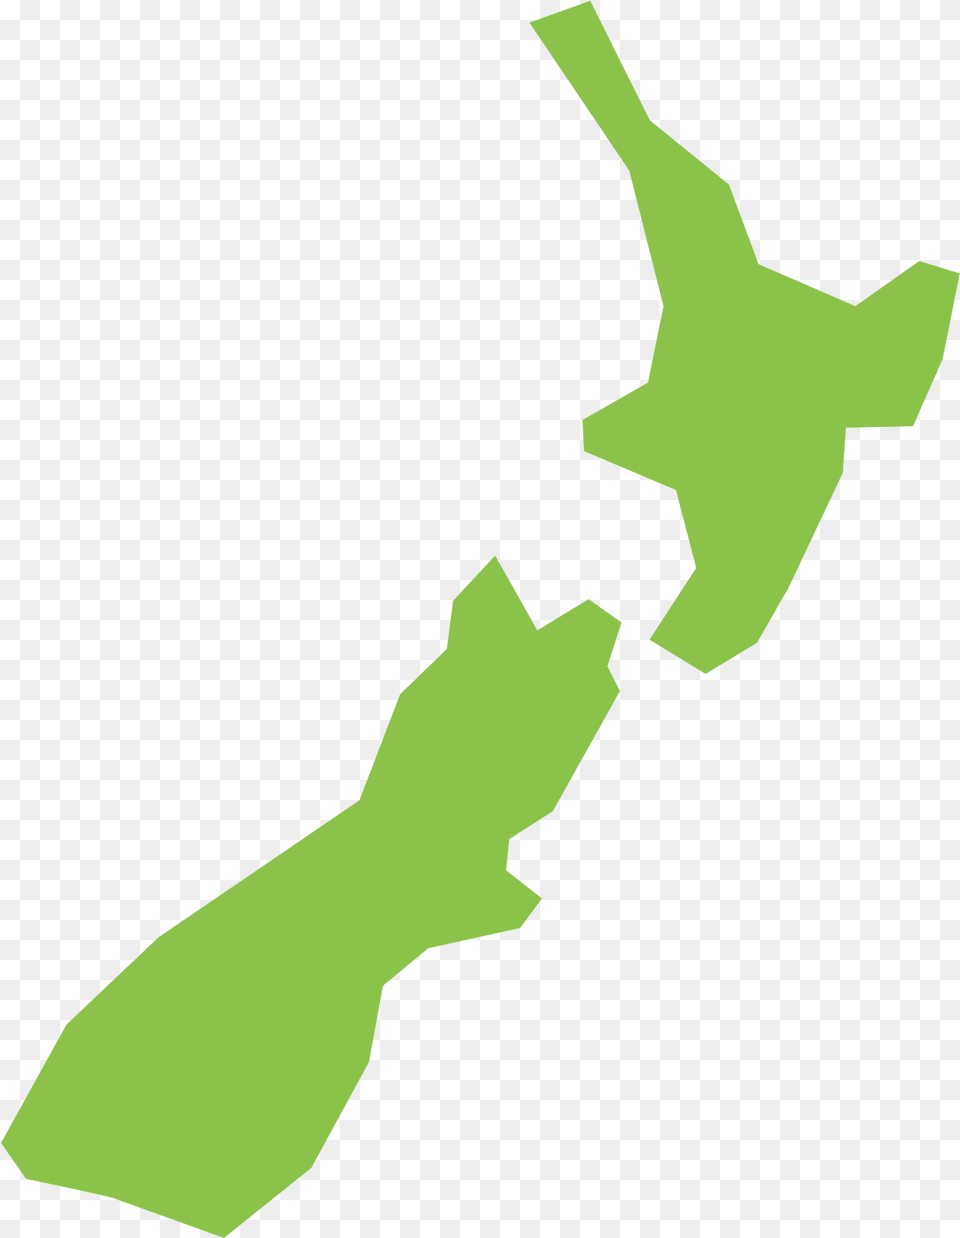 New New Zealand Map Vector, Accessories, Formal Wear, Tie, Person Png